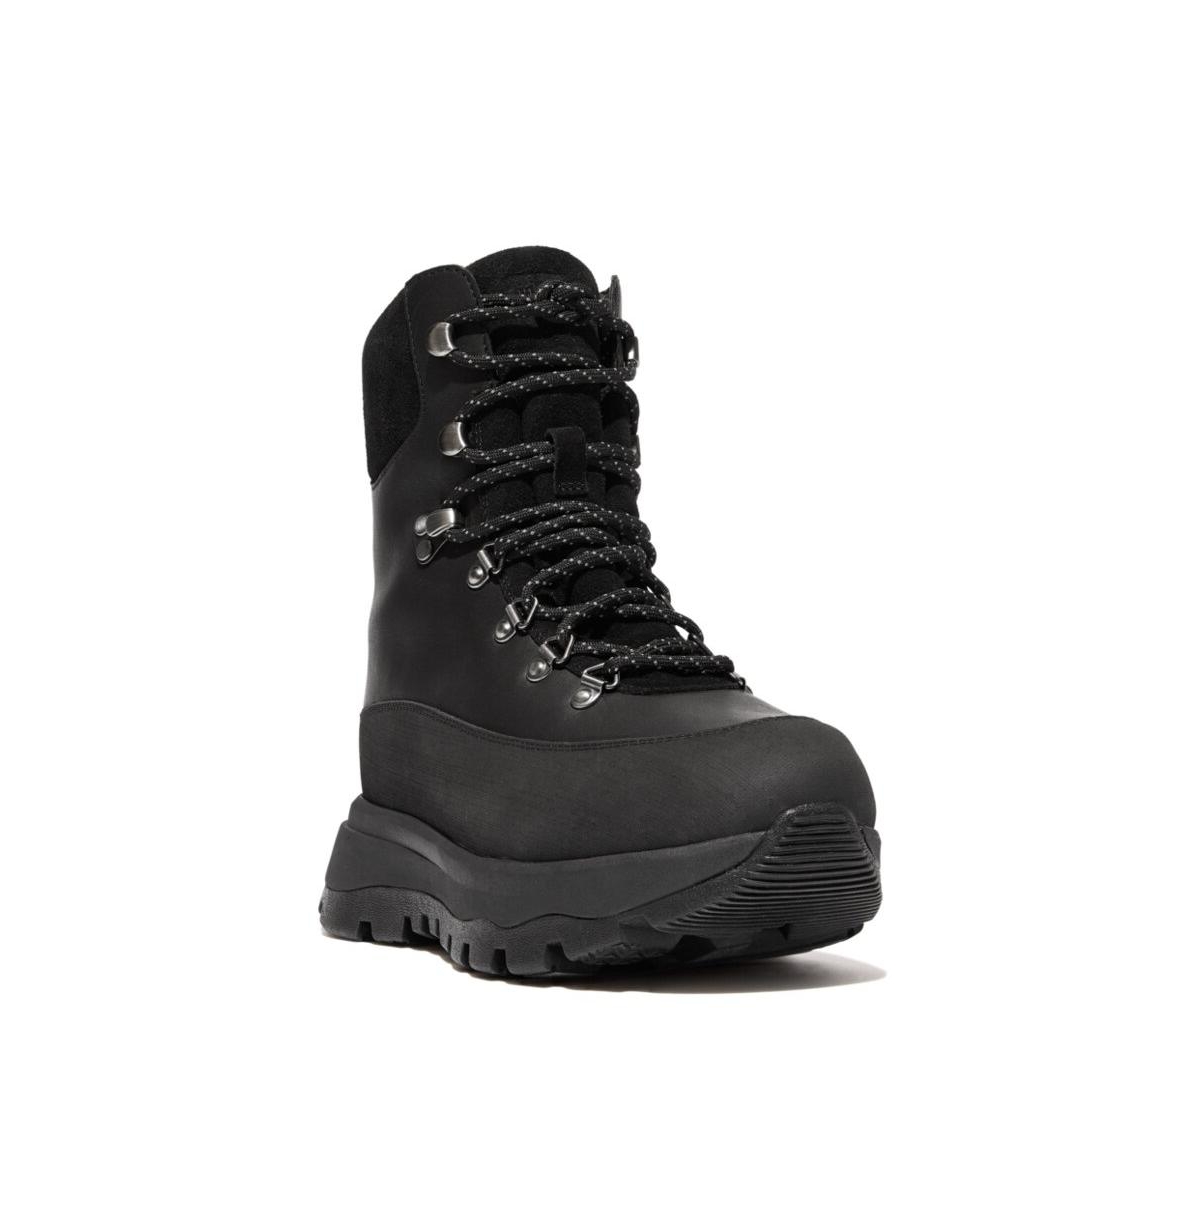 Women's Neo-d-Hyker Water Resistant Leather and Suede Fleece-Lined Walking Boots - All Black